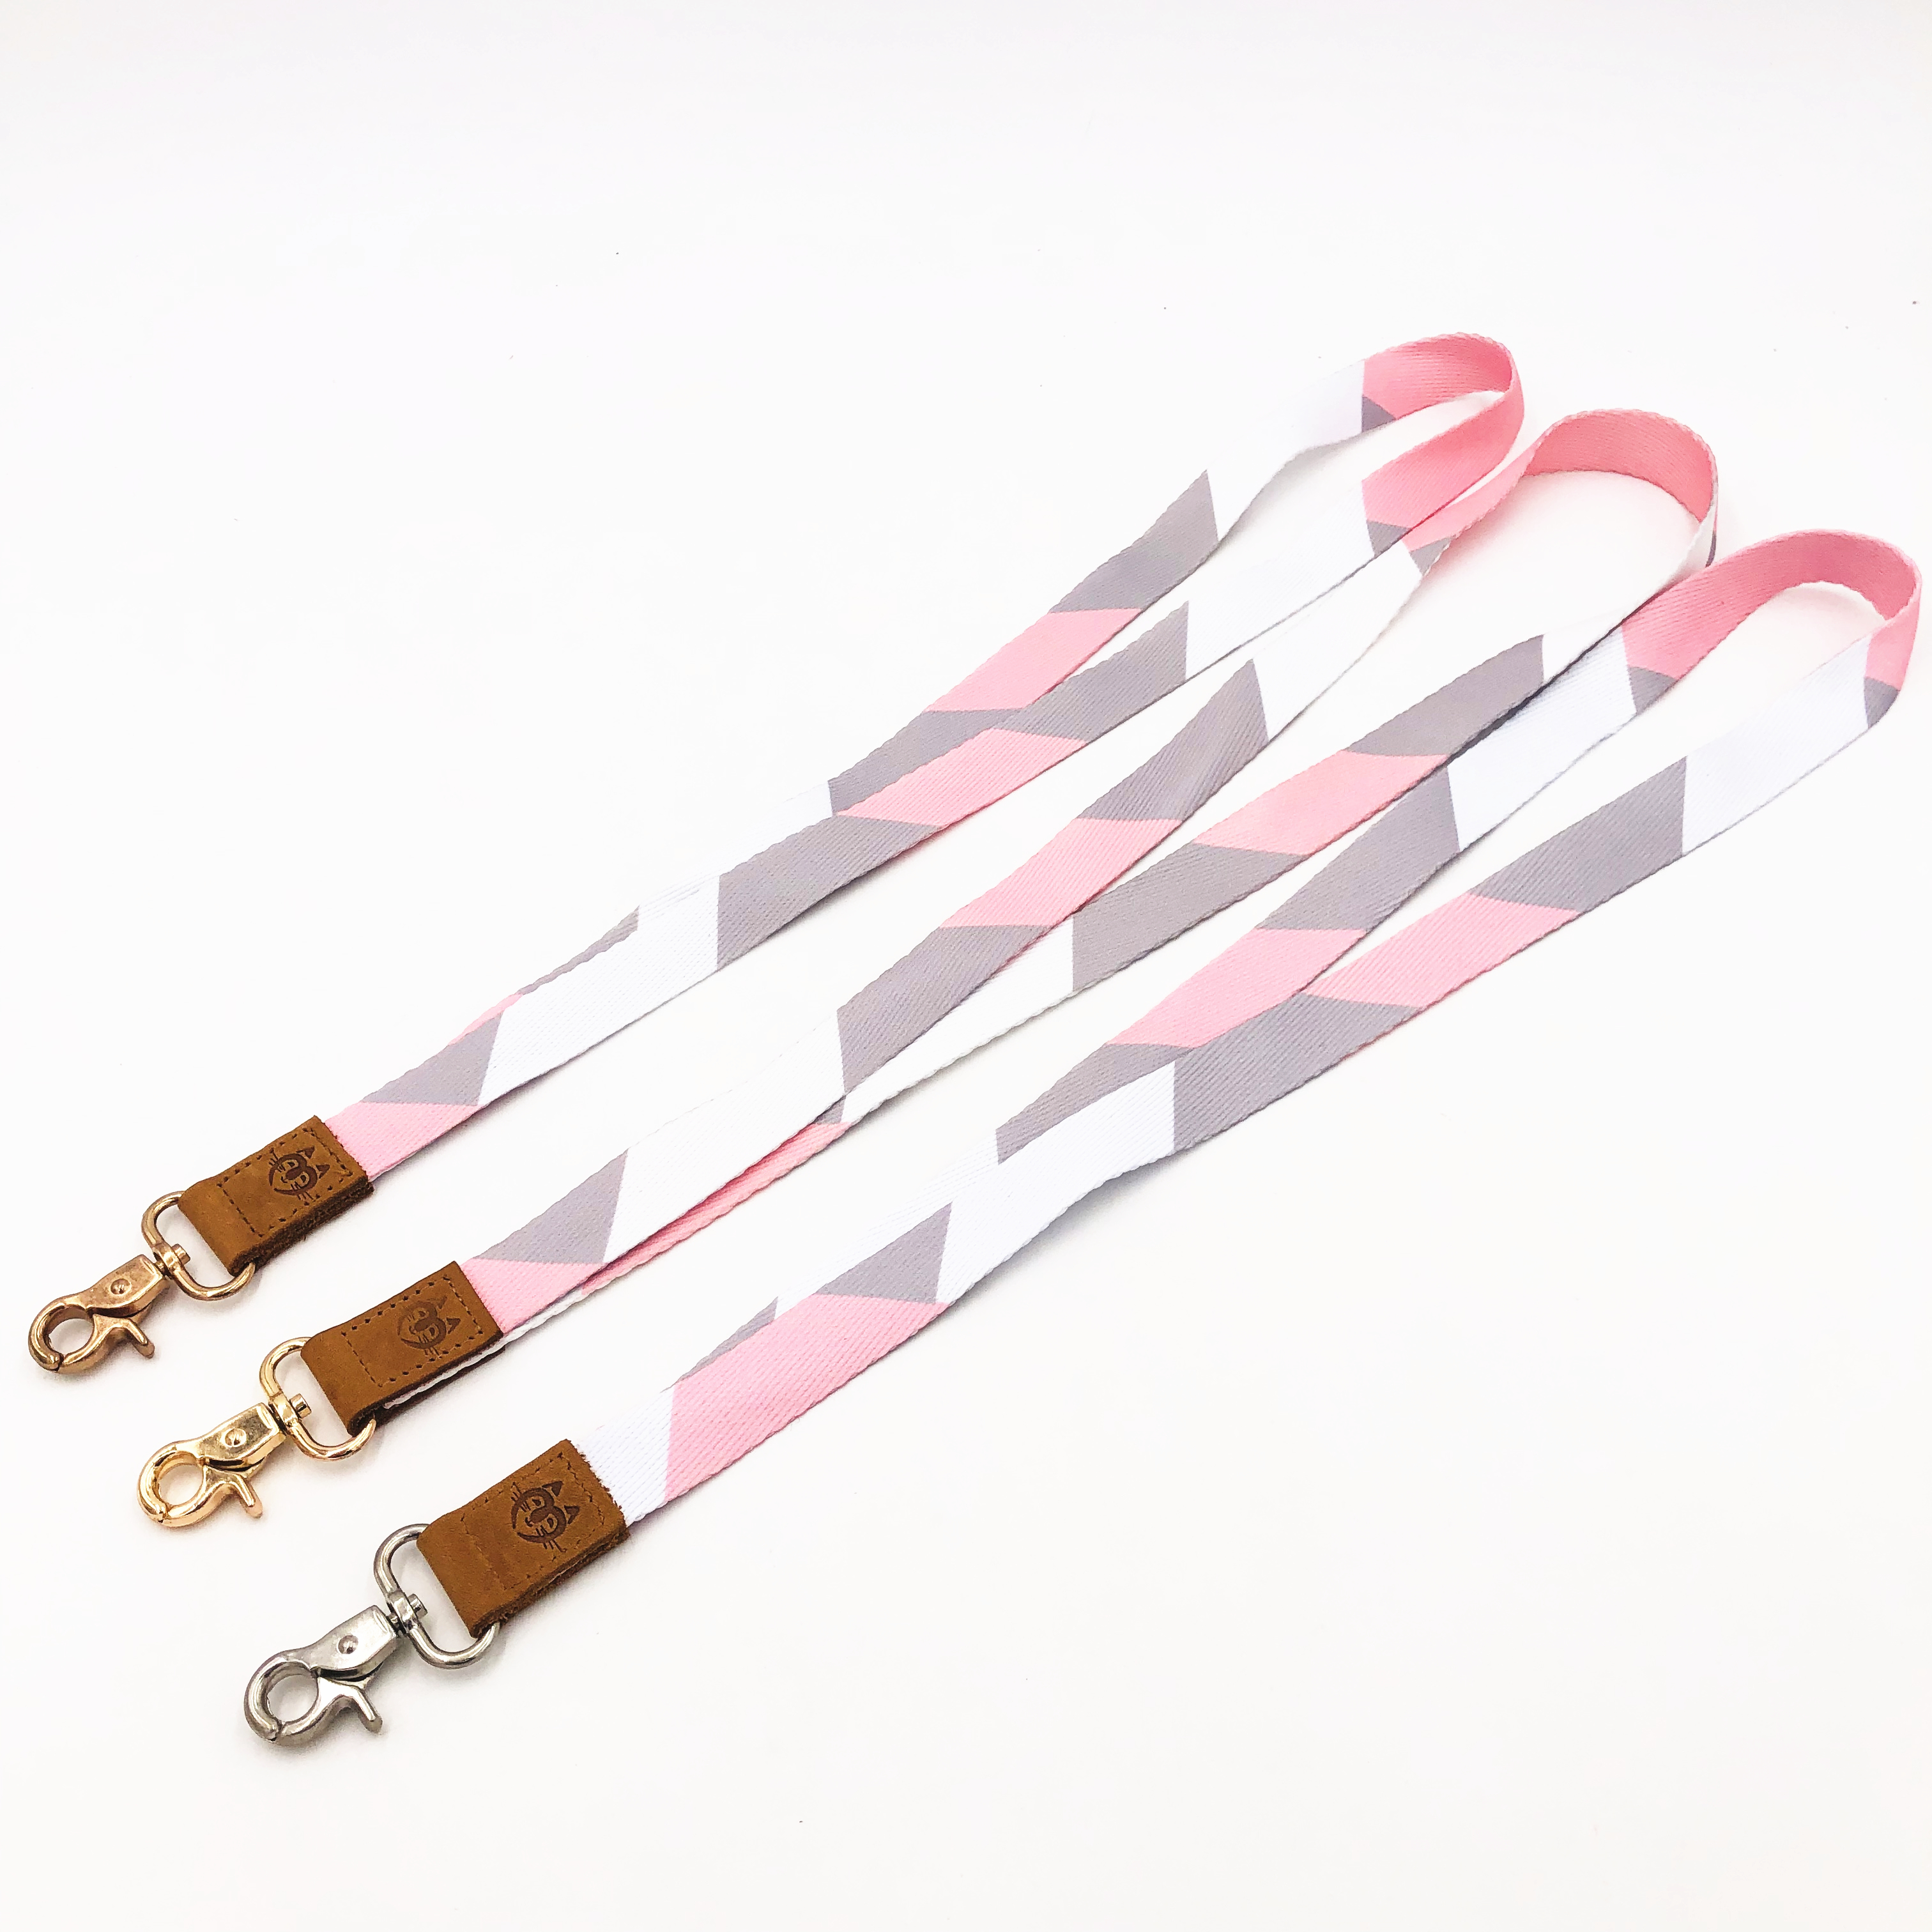 China Cheap price Sublimation Printing Lanyard – Stylish Latest High End Custom Leather Polyester Neck Strap Lanyard – Bison